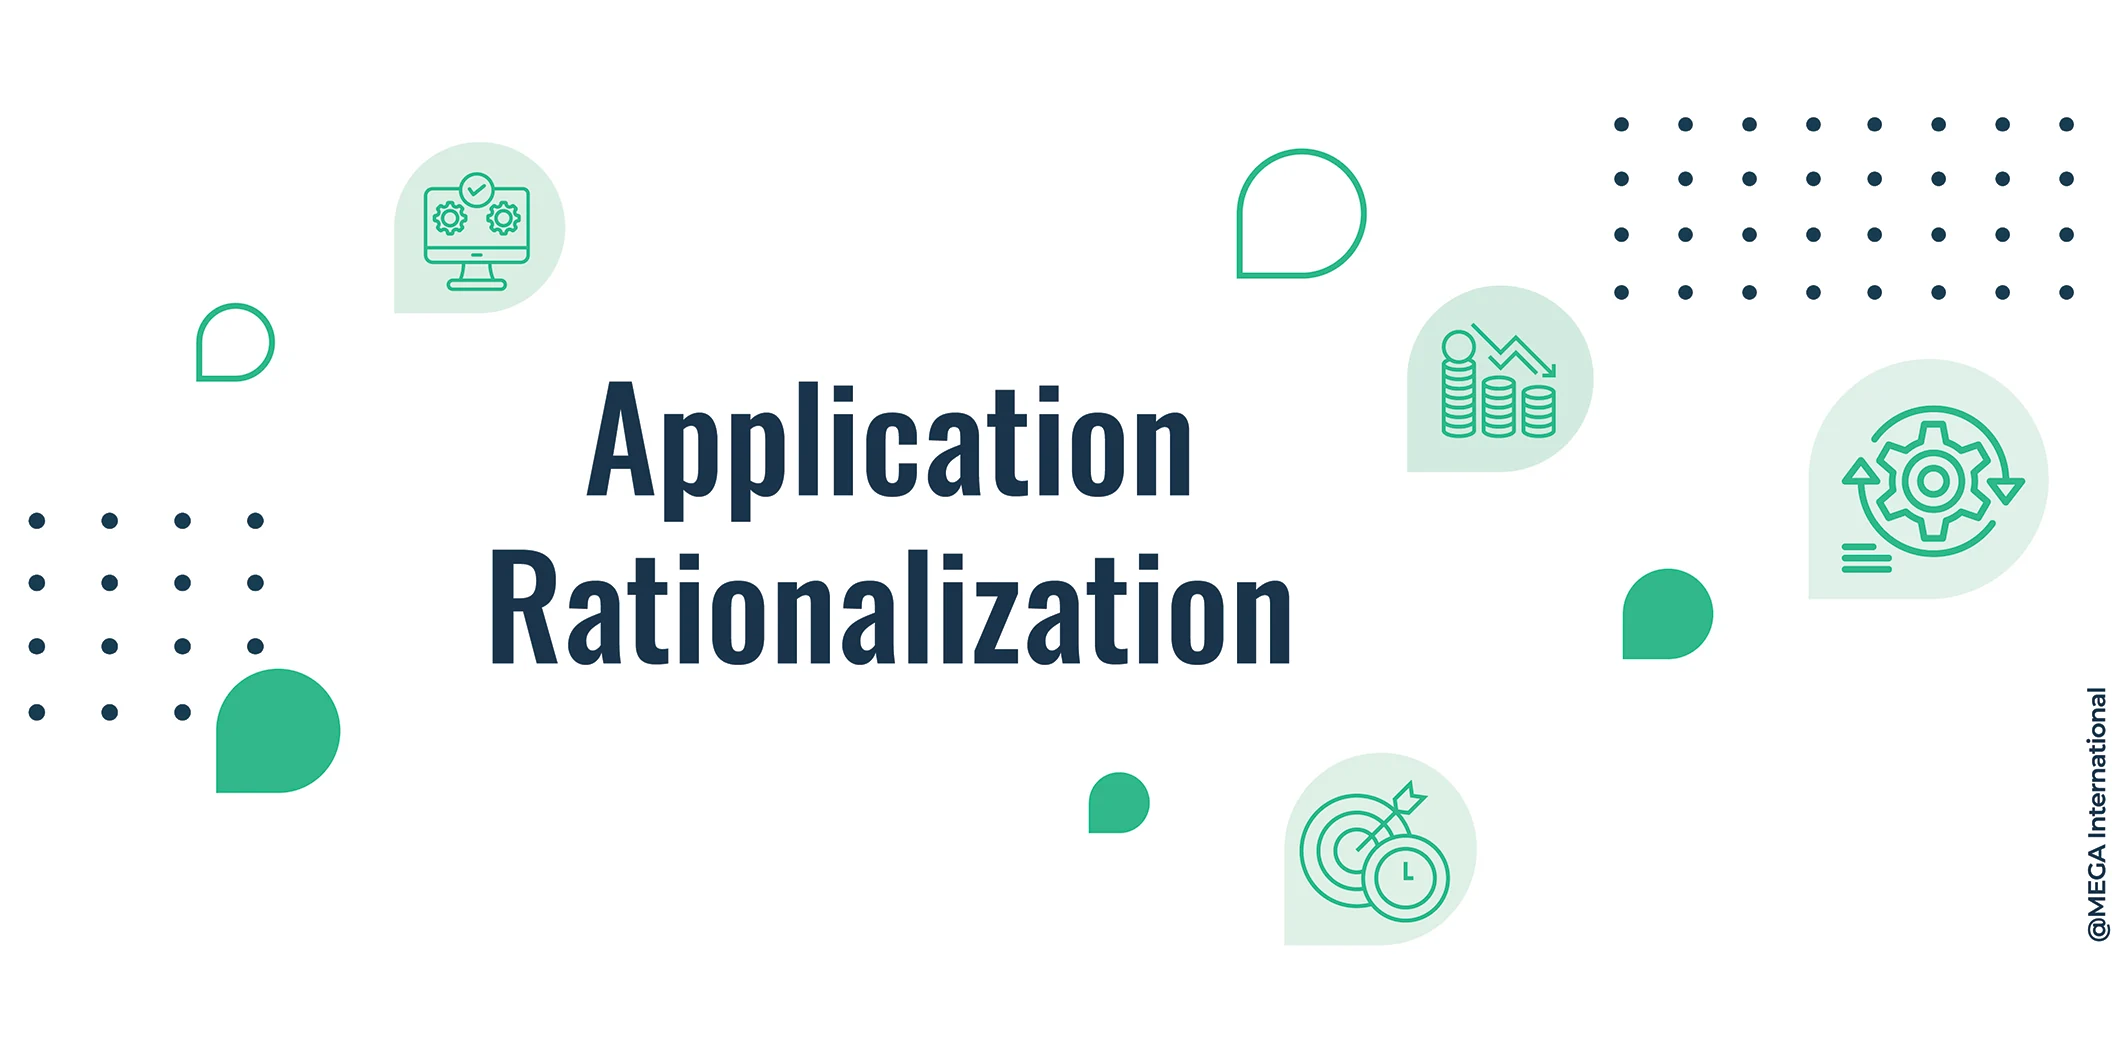 What is Application Rationalization?